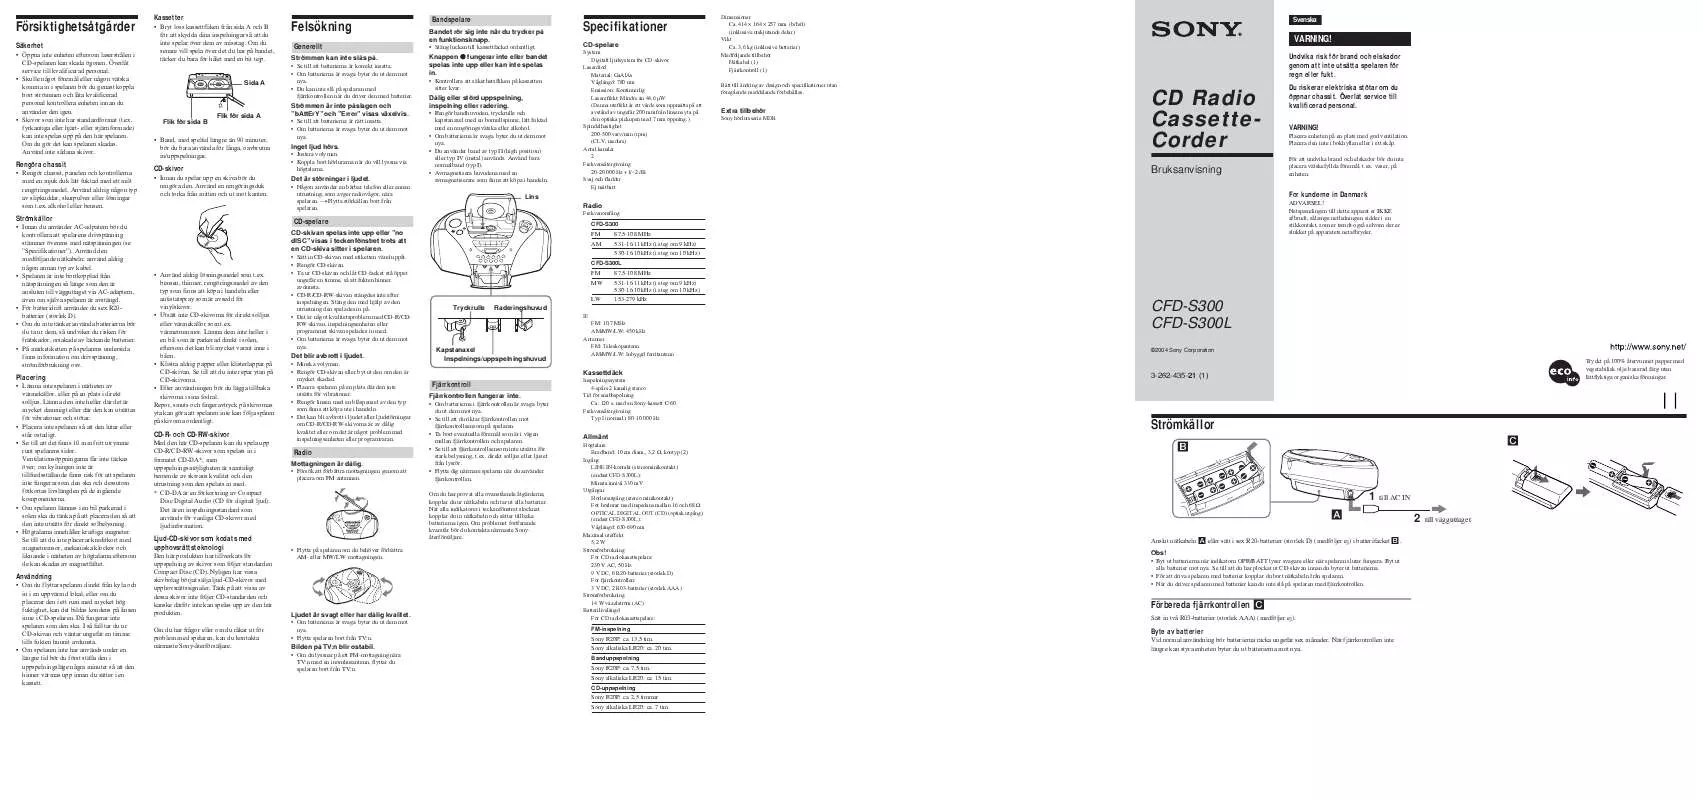 Mode d'emploi SONY CFD-S300L